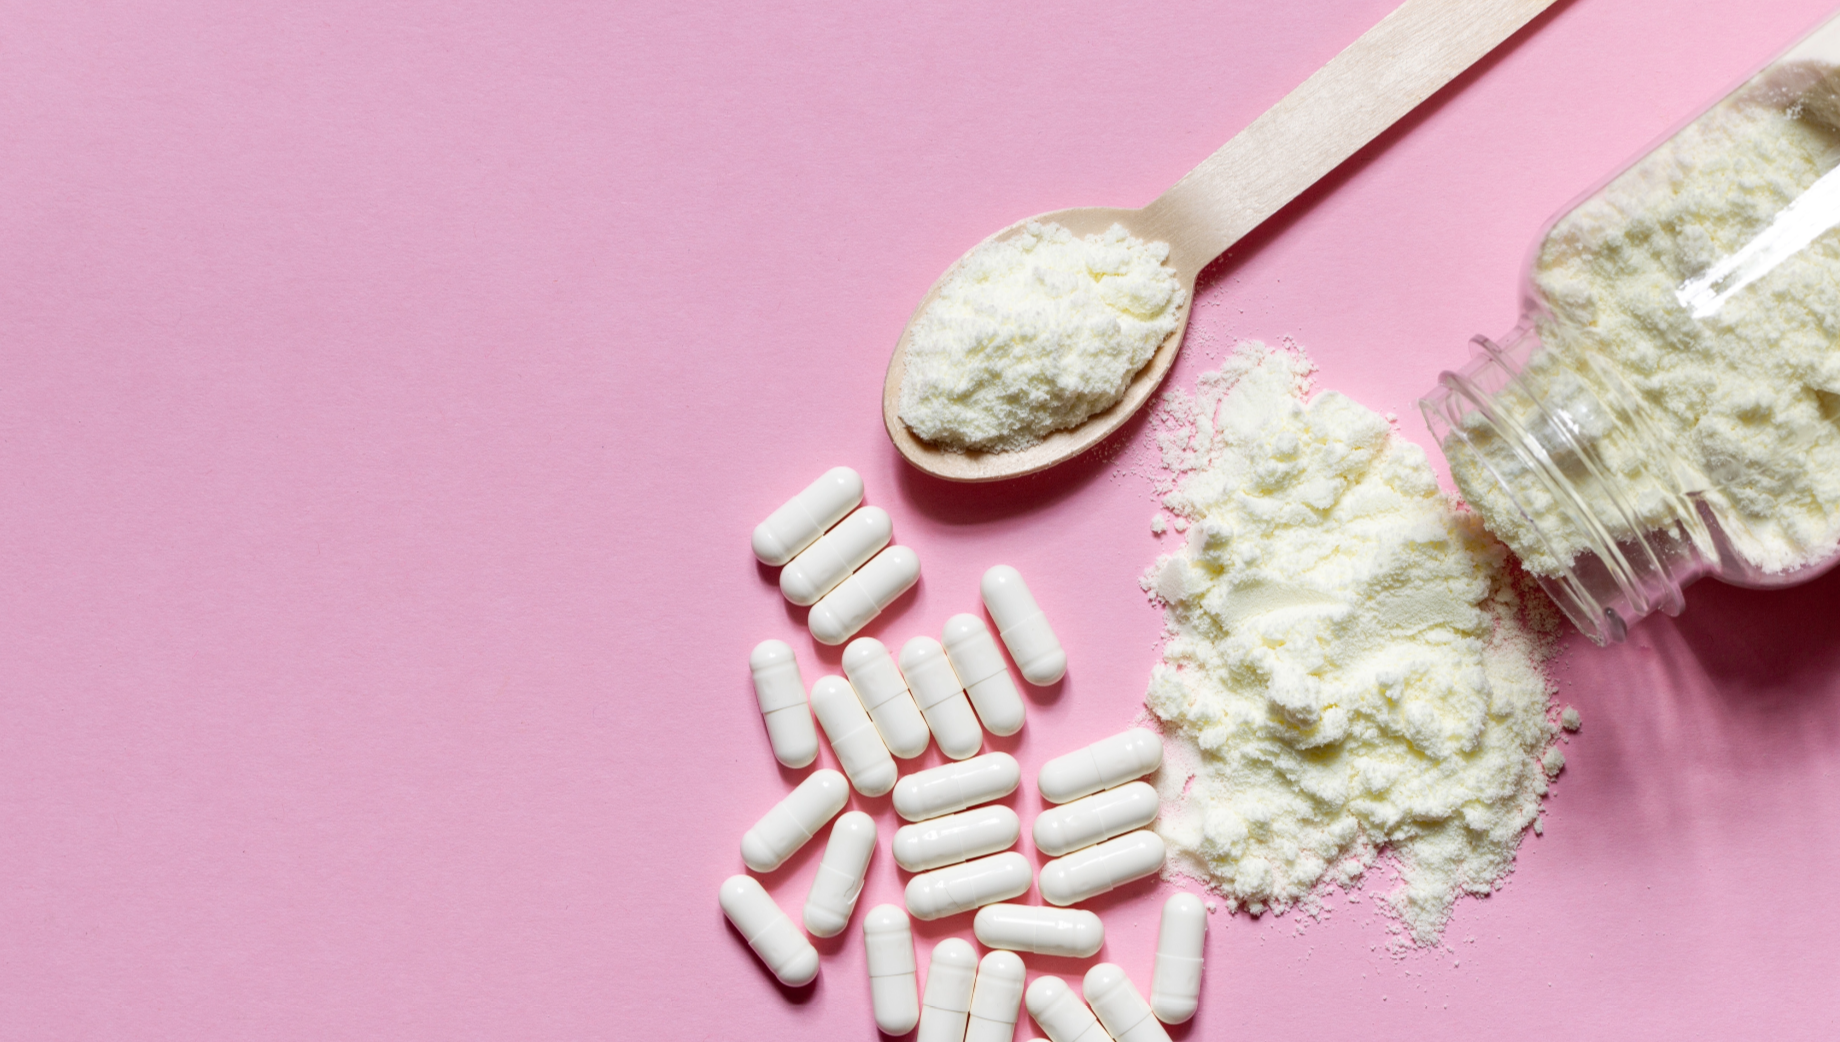 Collagen supplements are good for hair and skin?